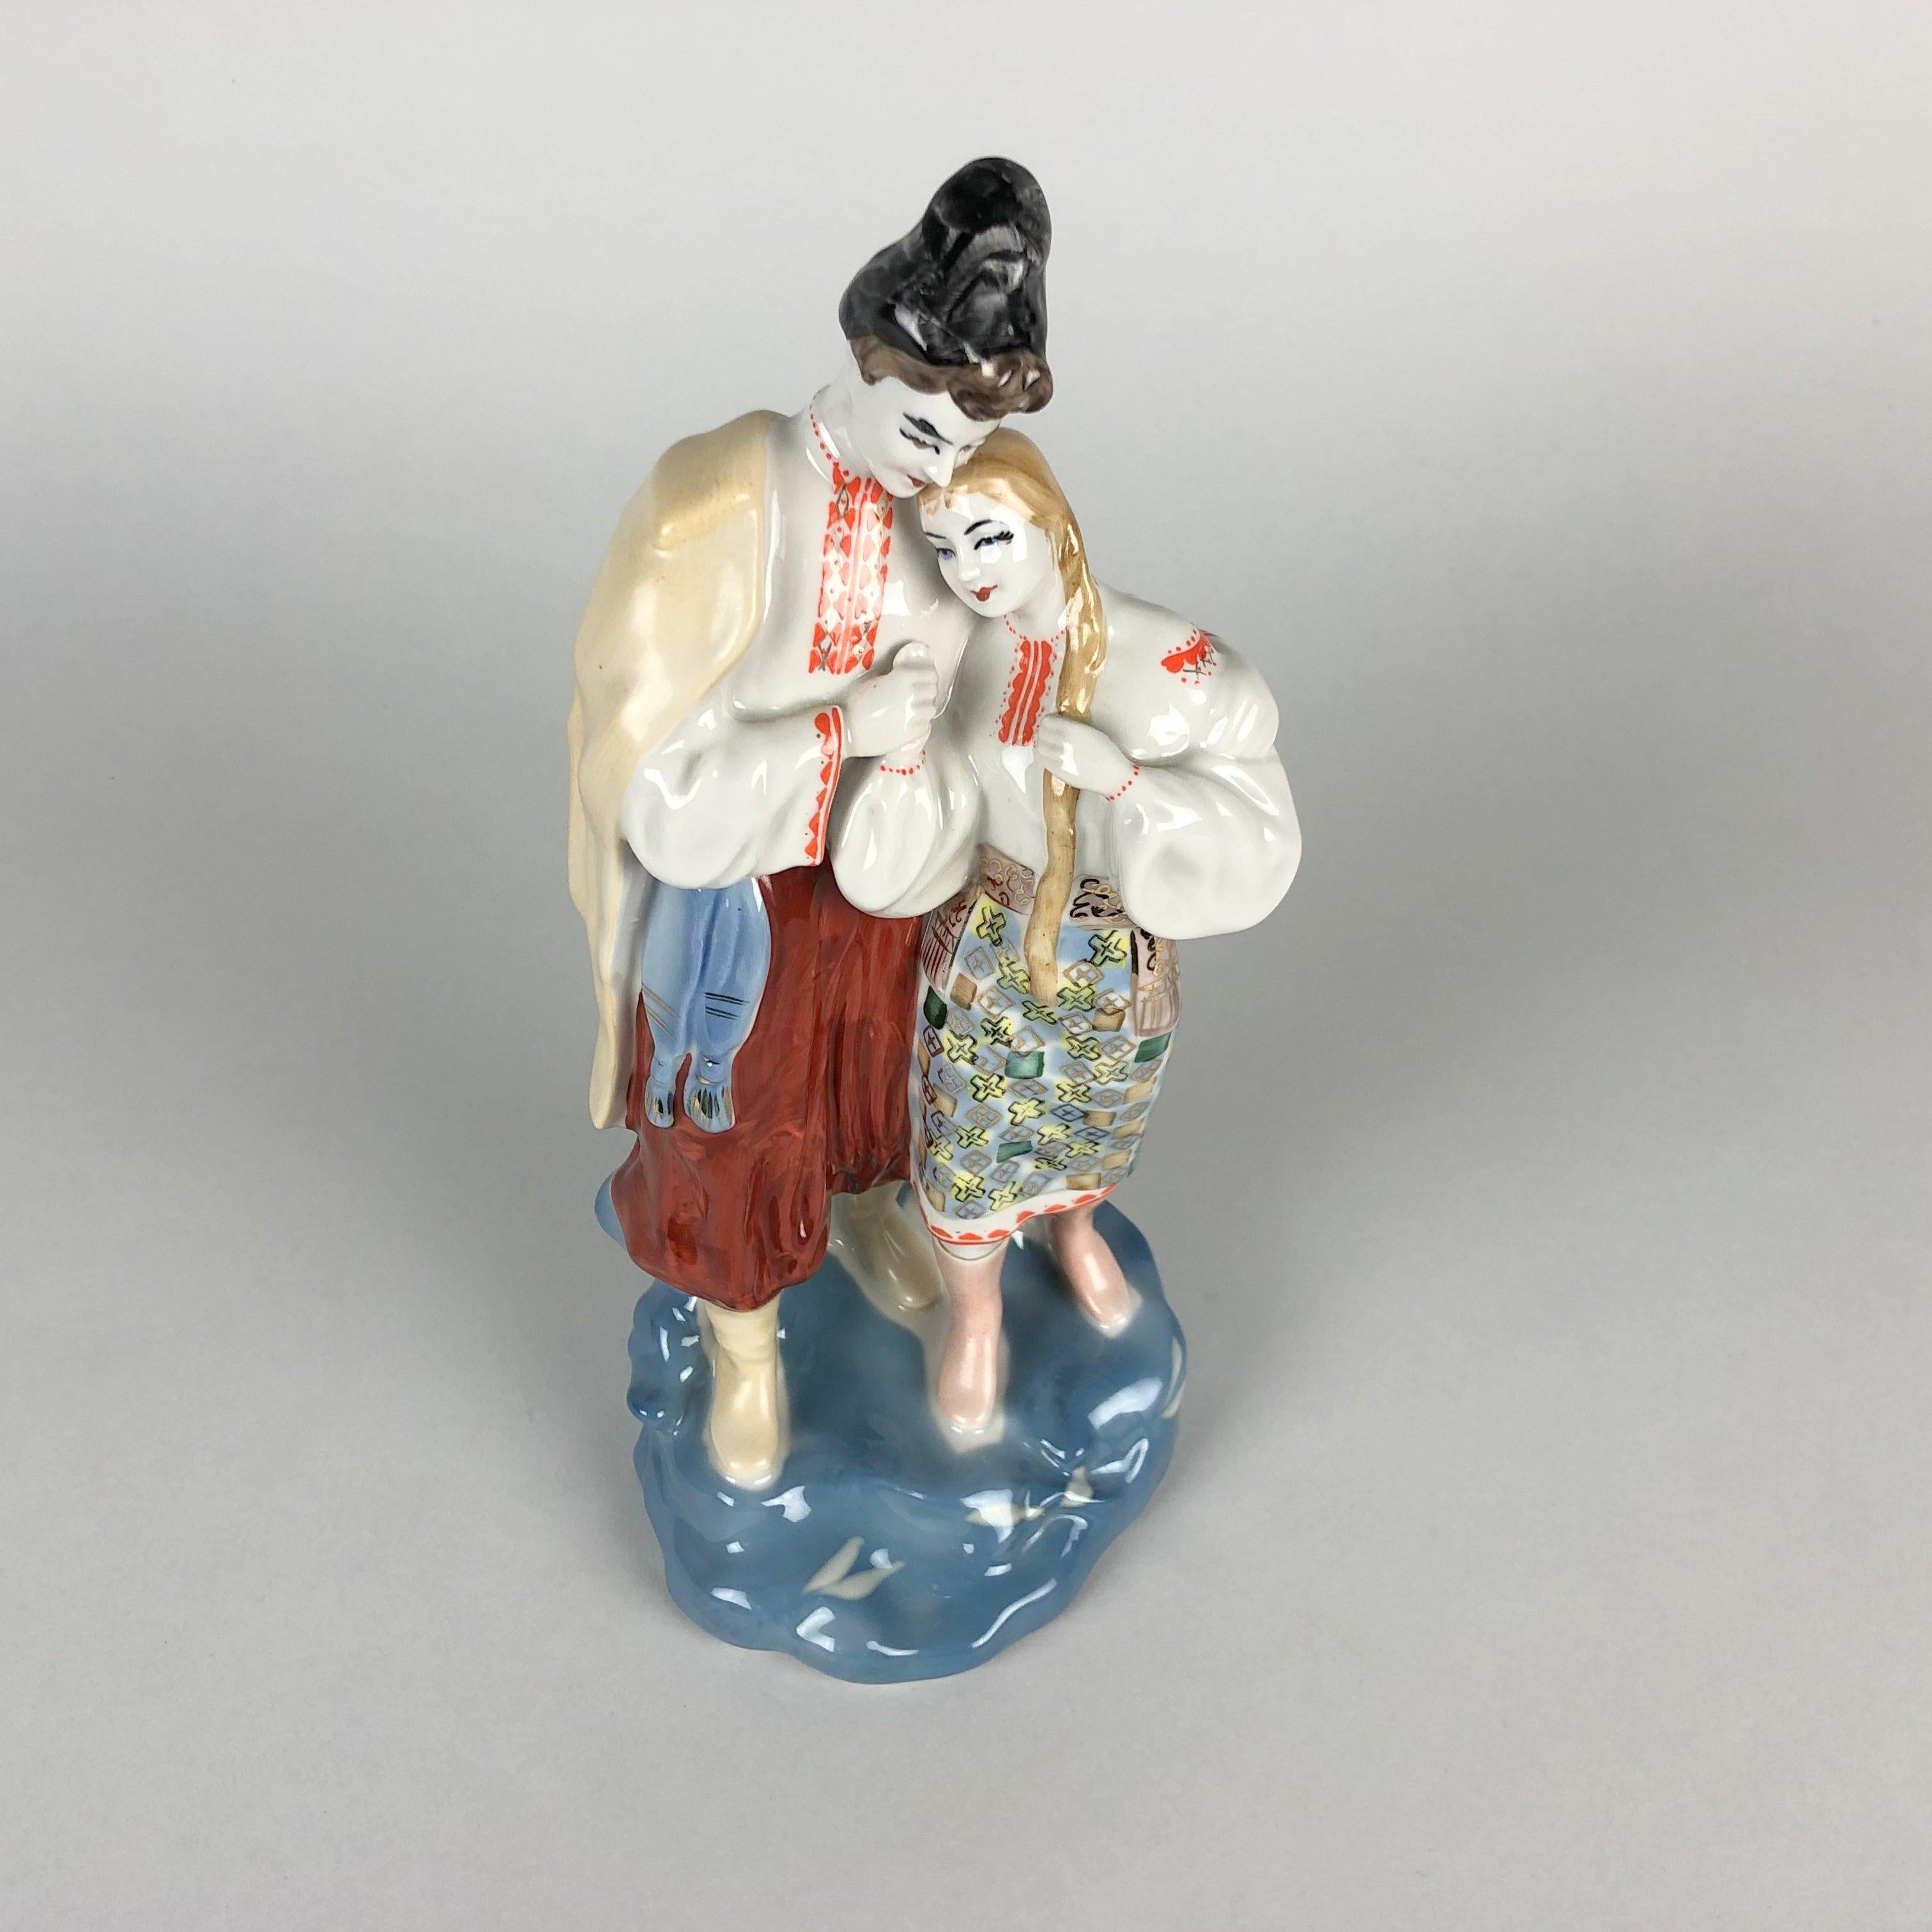 Vintage Ukrainian porcelain figurine of two lovers in a very good vintage condition. Marked with 